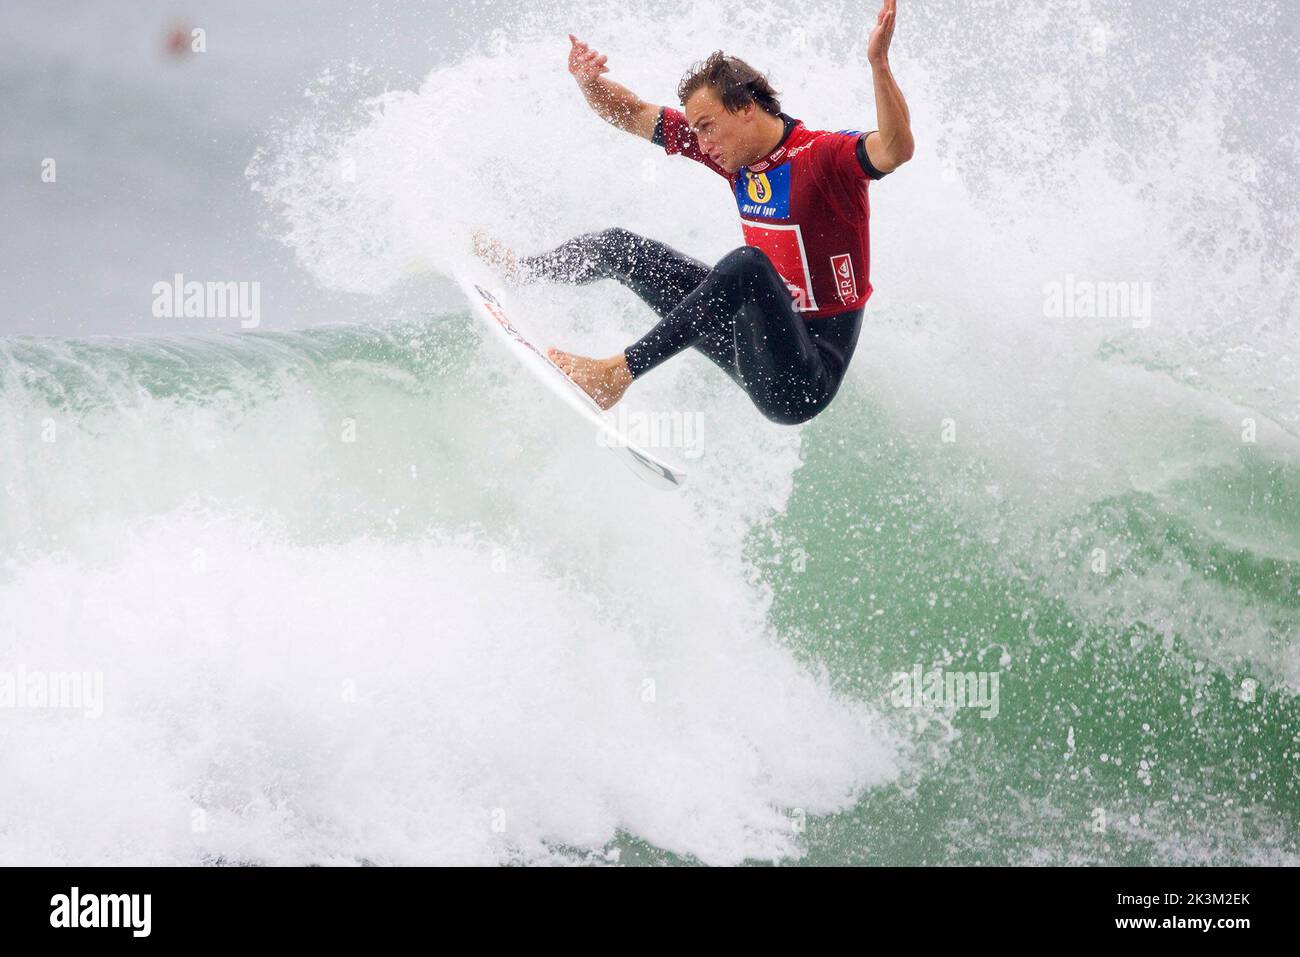 Sep 05, 2004; Hebara Beach, Chiba, Japan; CHRIS DAVIDSON (Narrabeen, NSW, AUS) secured his best result to date when he finished equal third at the Quiksilver Pro Japan. Davidson advanced to the semi-finals where he was beaten by an in-form Joel Parkinson. Davidson pocked US0 000 in prize money and jumped from 40th to 24th on the ASP WCT ratings. Having missed three WCT's earlier this year due to a seriously cut foot, his high finish provided a huge confidence boost.The Quiksilver Pro Japan features the top 45 male surfers in the world and three wild cards and is the sixth event on the Fosters Stock Photo